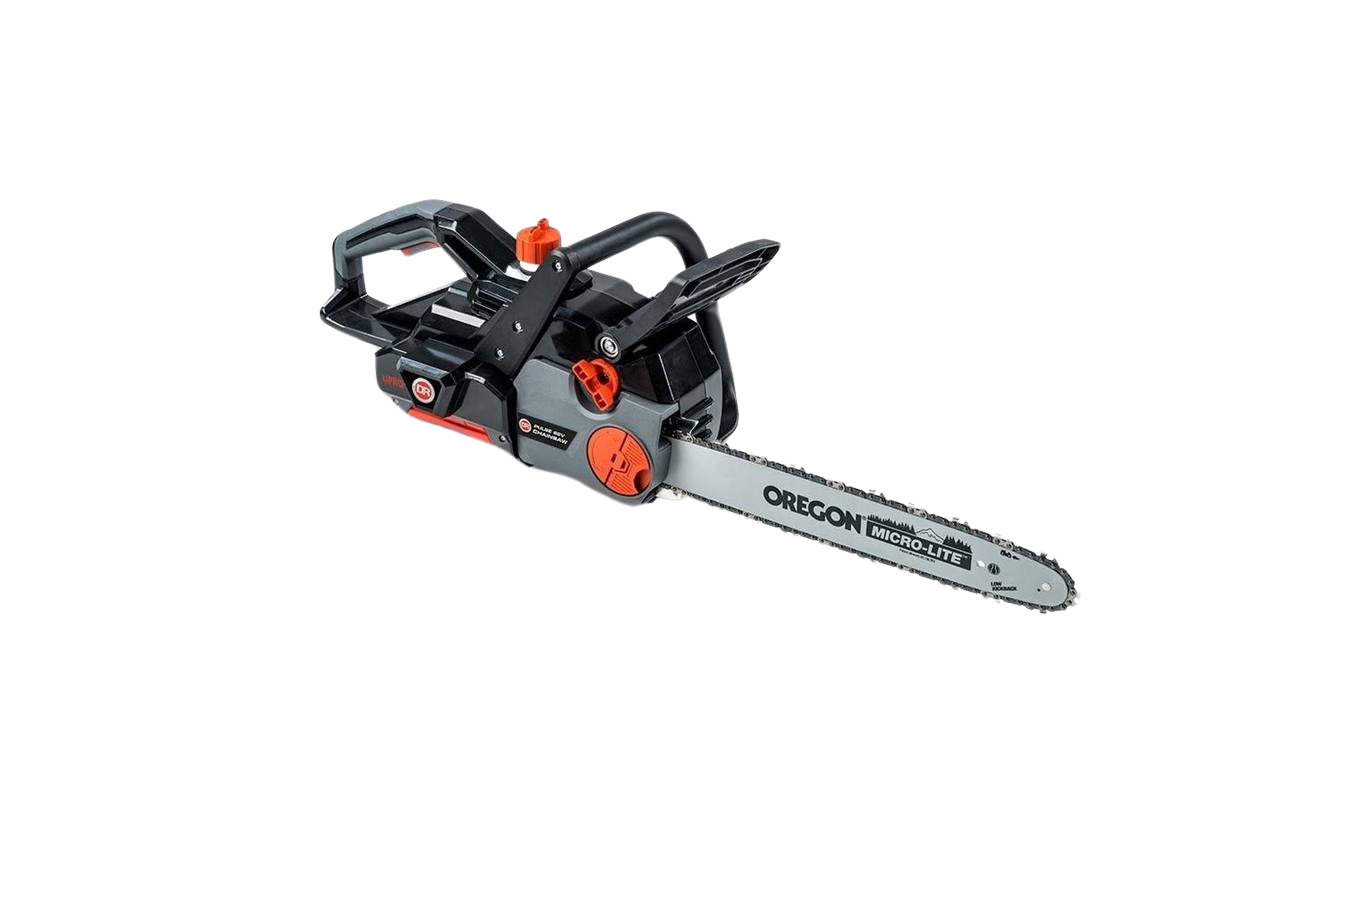 DR Power, DR Power Chainsaw 16" Oregon Bar & Chain 1500W Brushless Motor Cordless 62V Battery Powered 414181 New